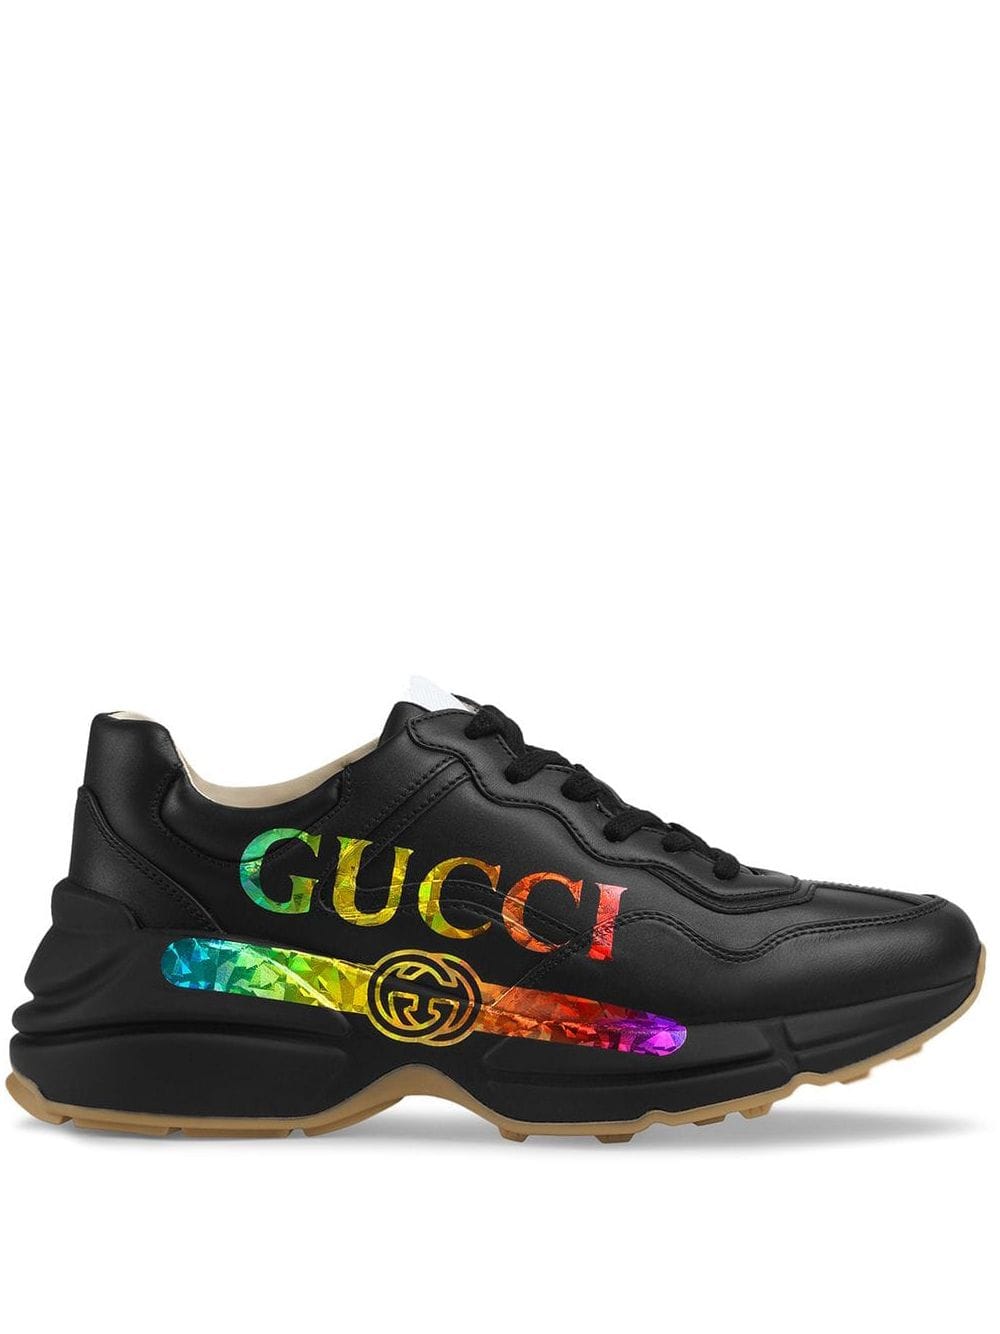 Rhyton leather sneaker with Gucci logo